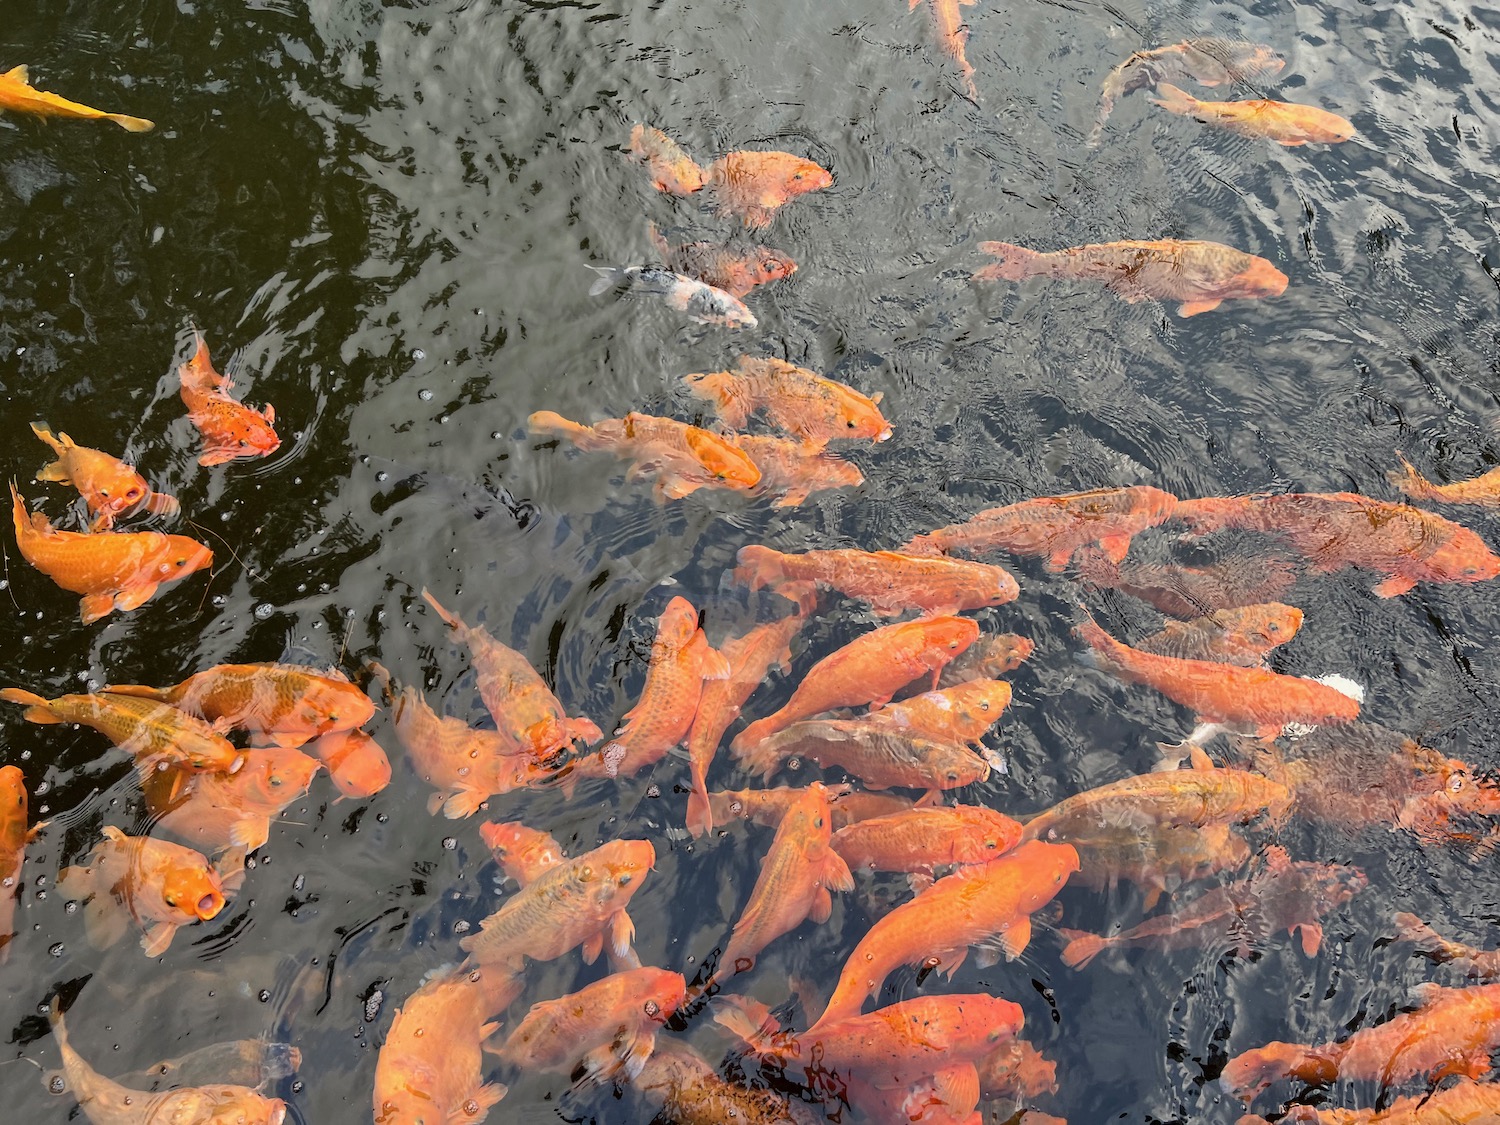 a group of orange fish in water